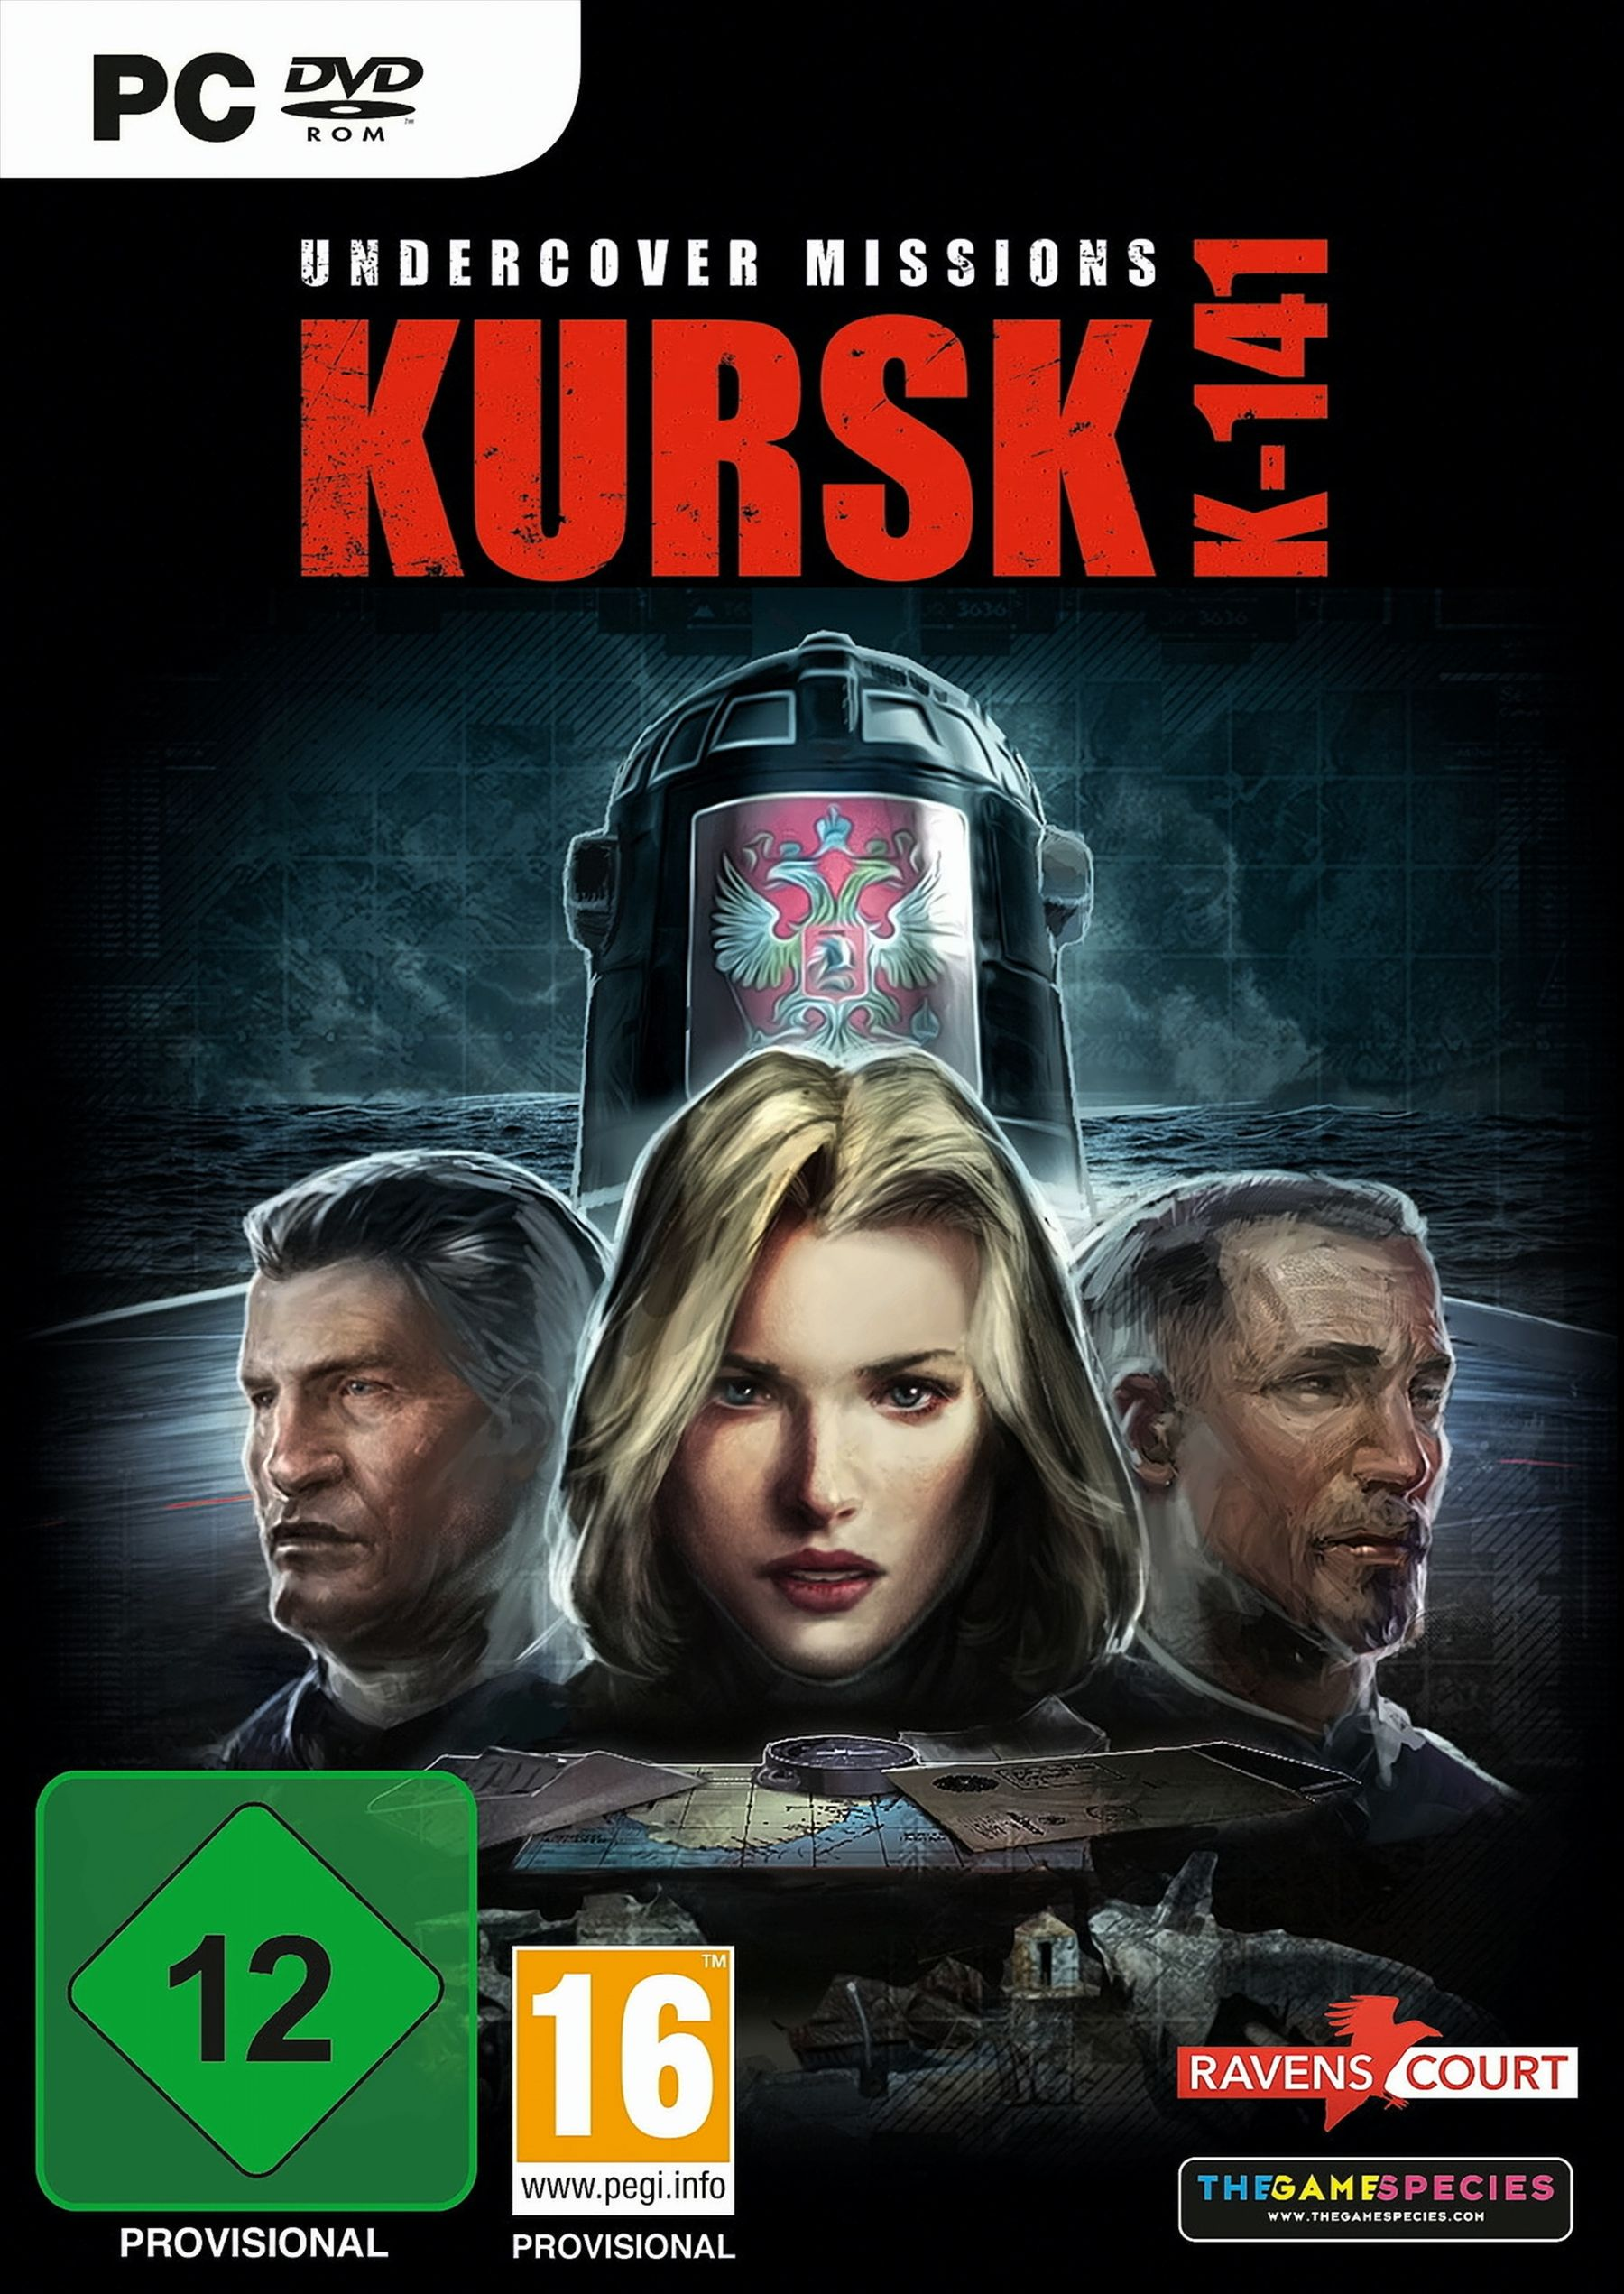 K-141 Kursk Operation Undercover [PC] Missions: -